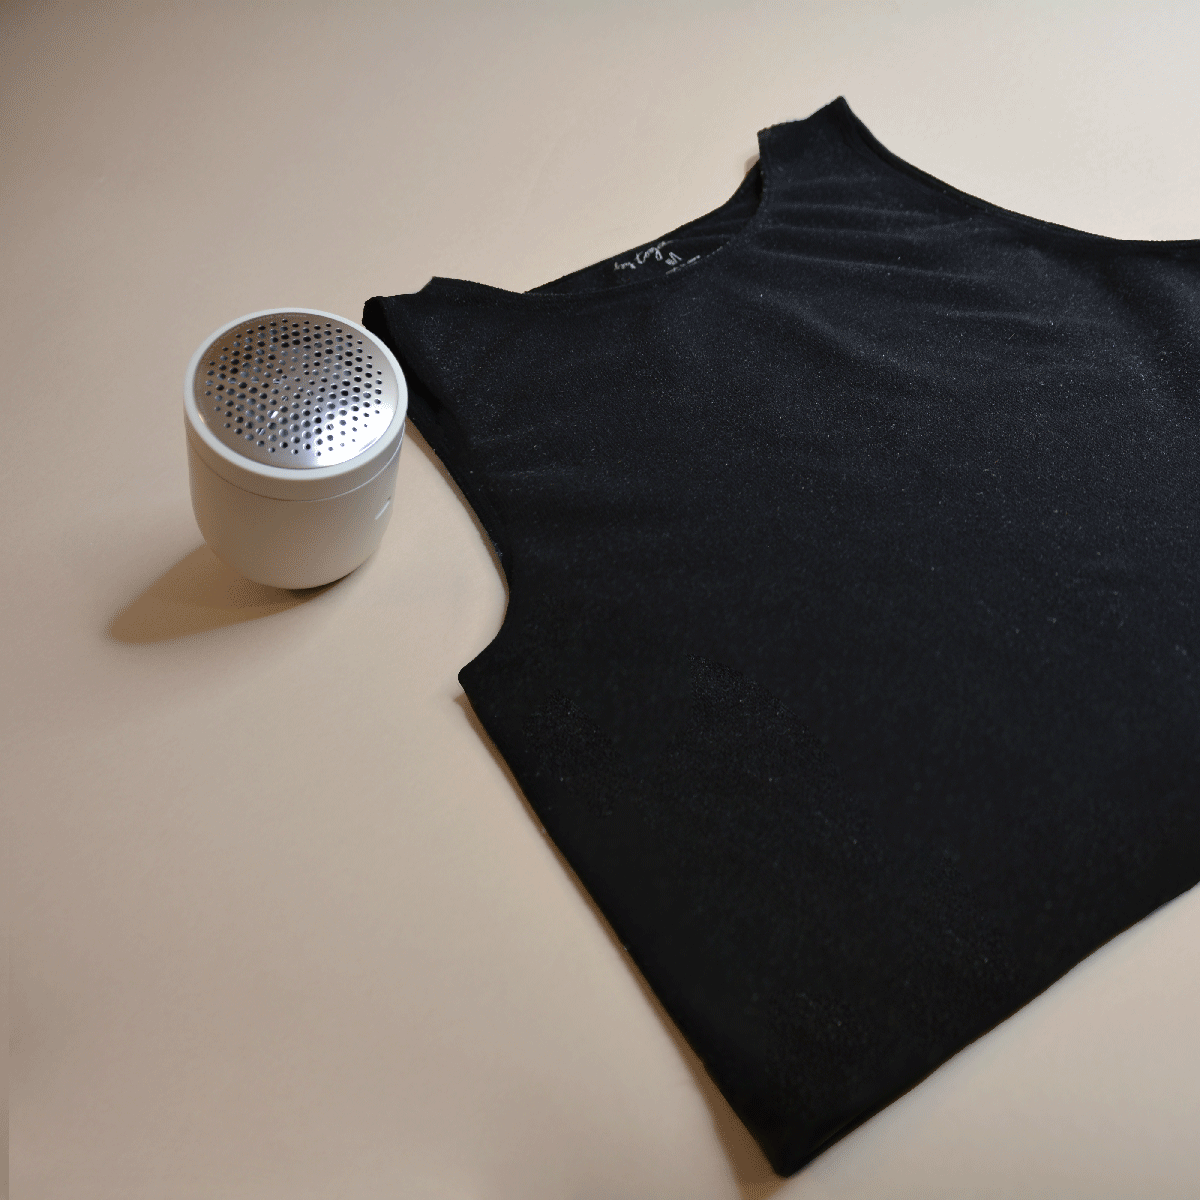 Before and after gif of a tank top that has been cleaned up with a fabric shaver